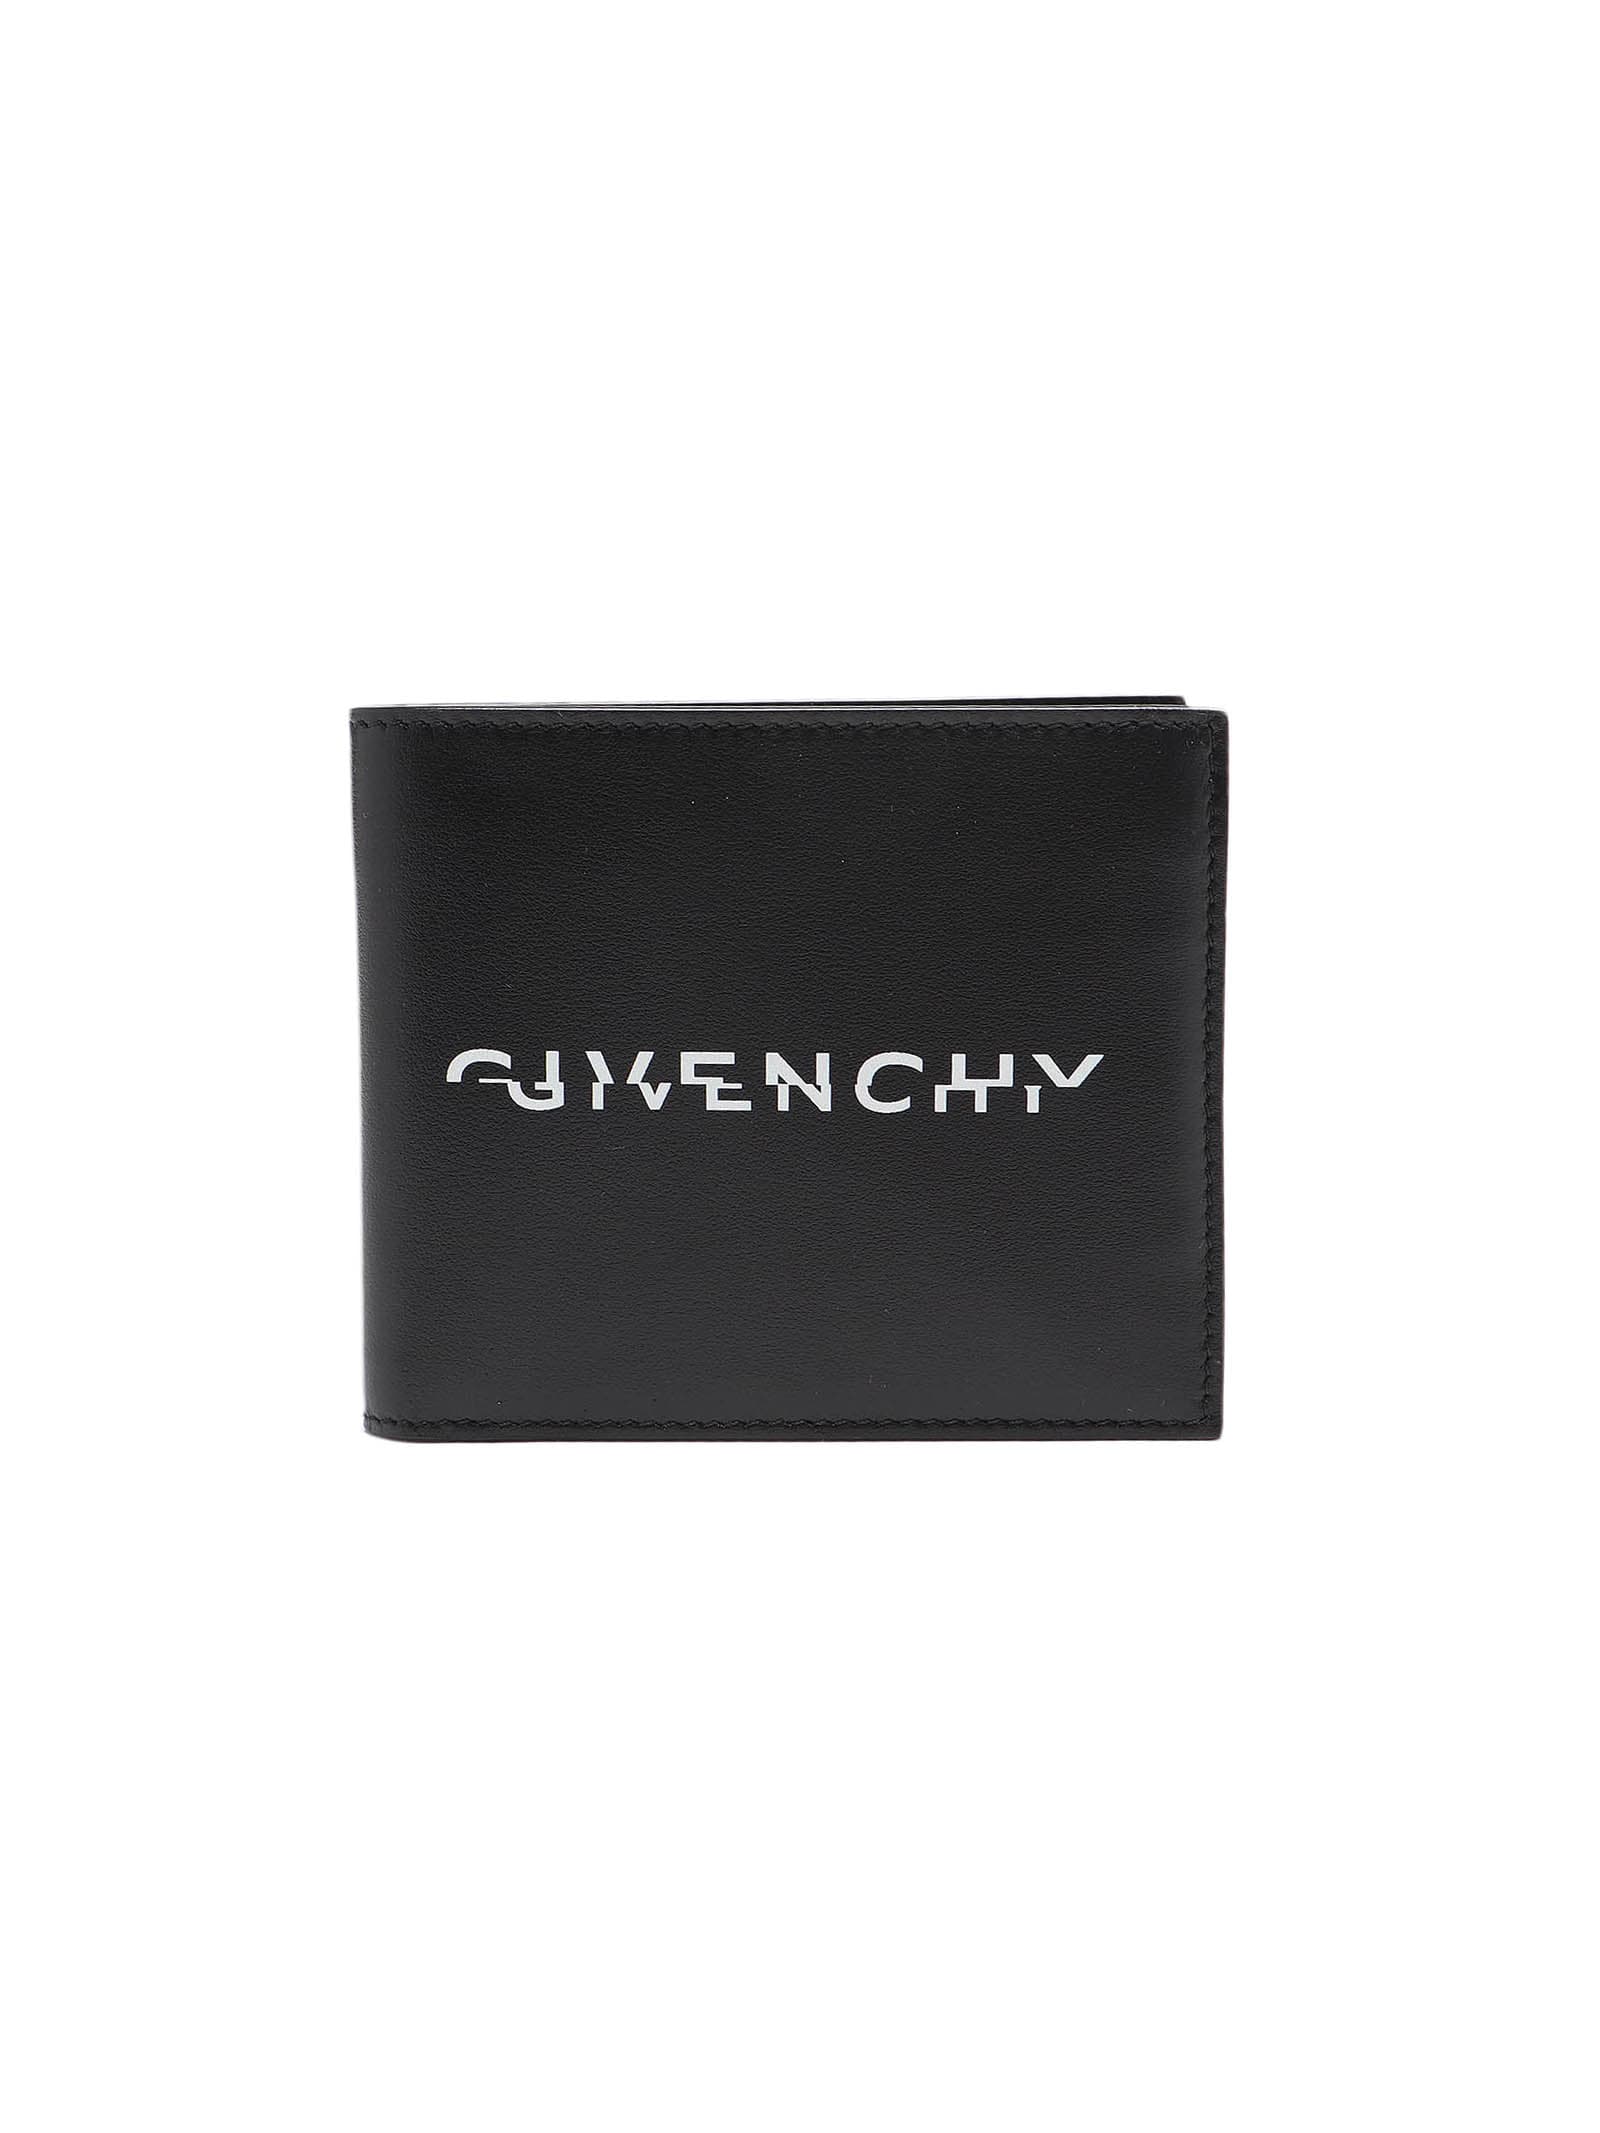 Givenchy Billfold 8cc Wallet In Black/white